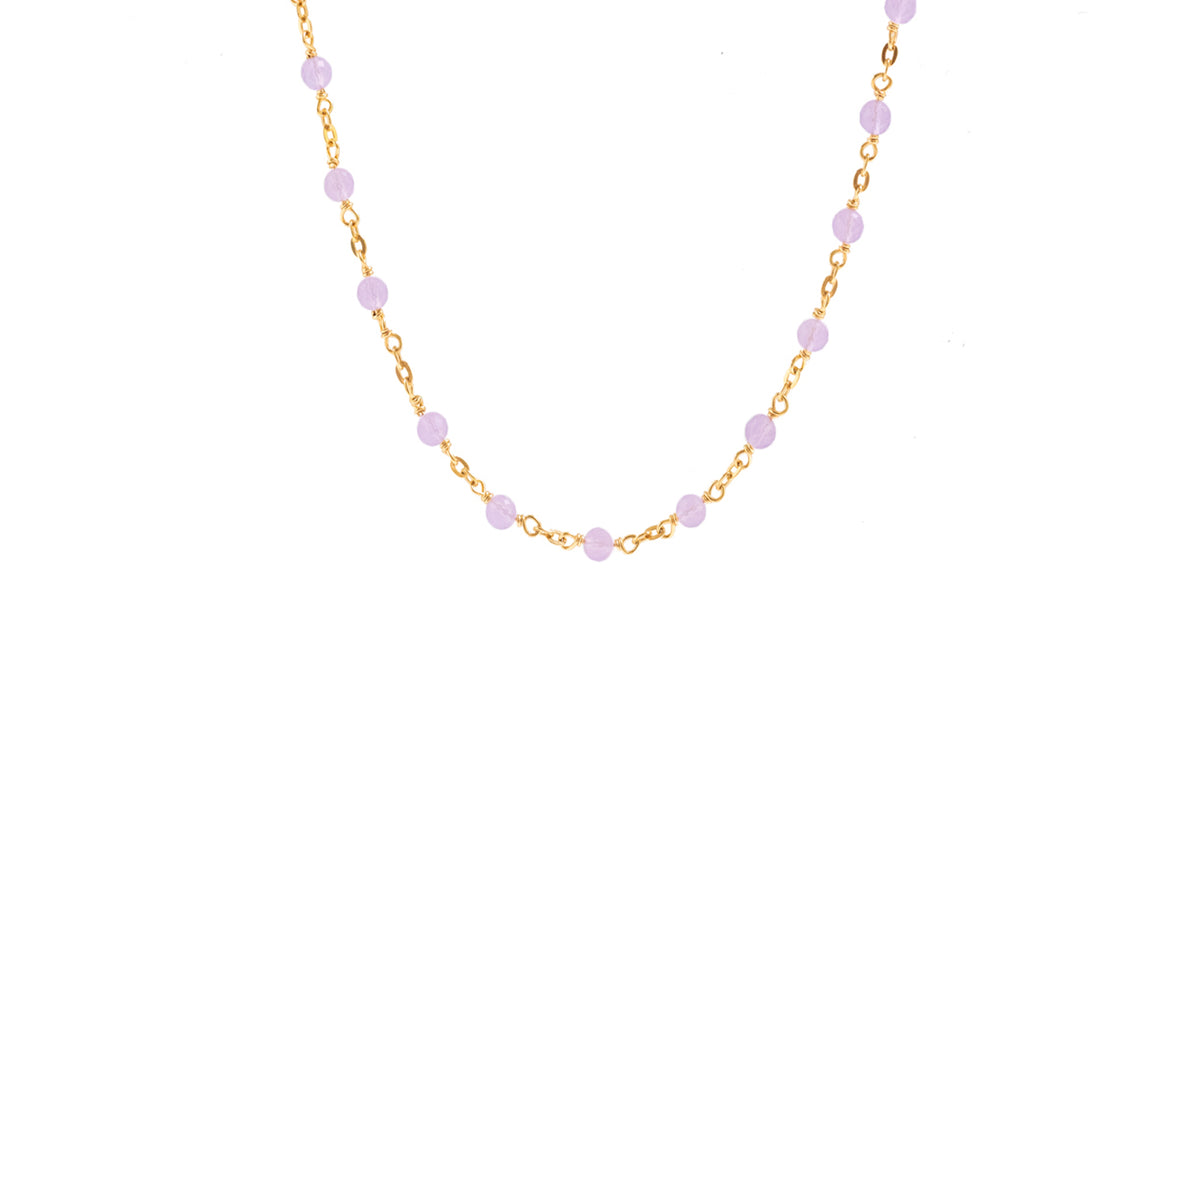 ICONIC SHORT BEADED NECKLACE - LAVENDER CHALCEDONY &amp; GOLD 16-20&quot;